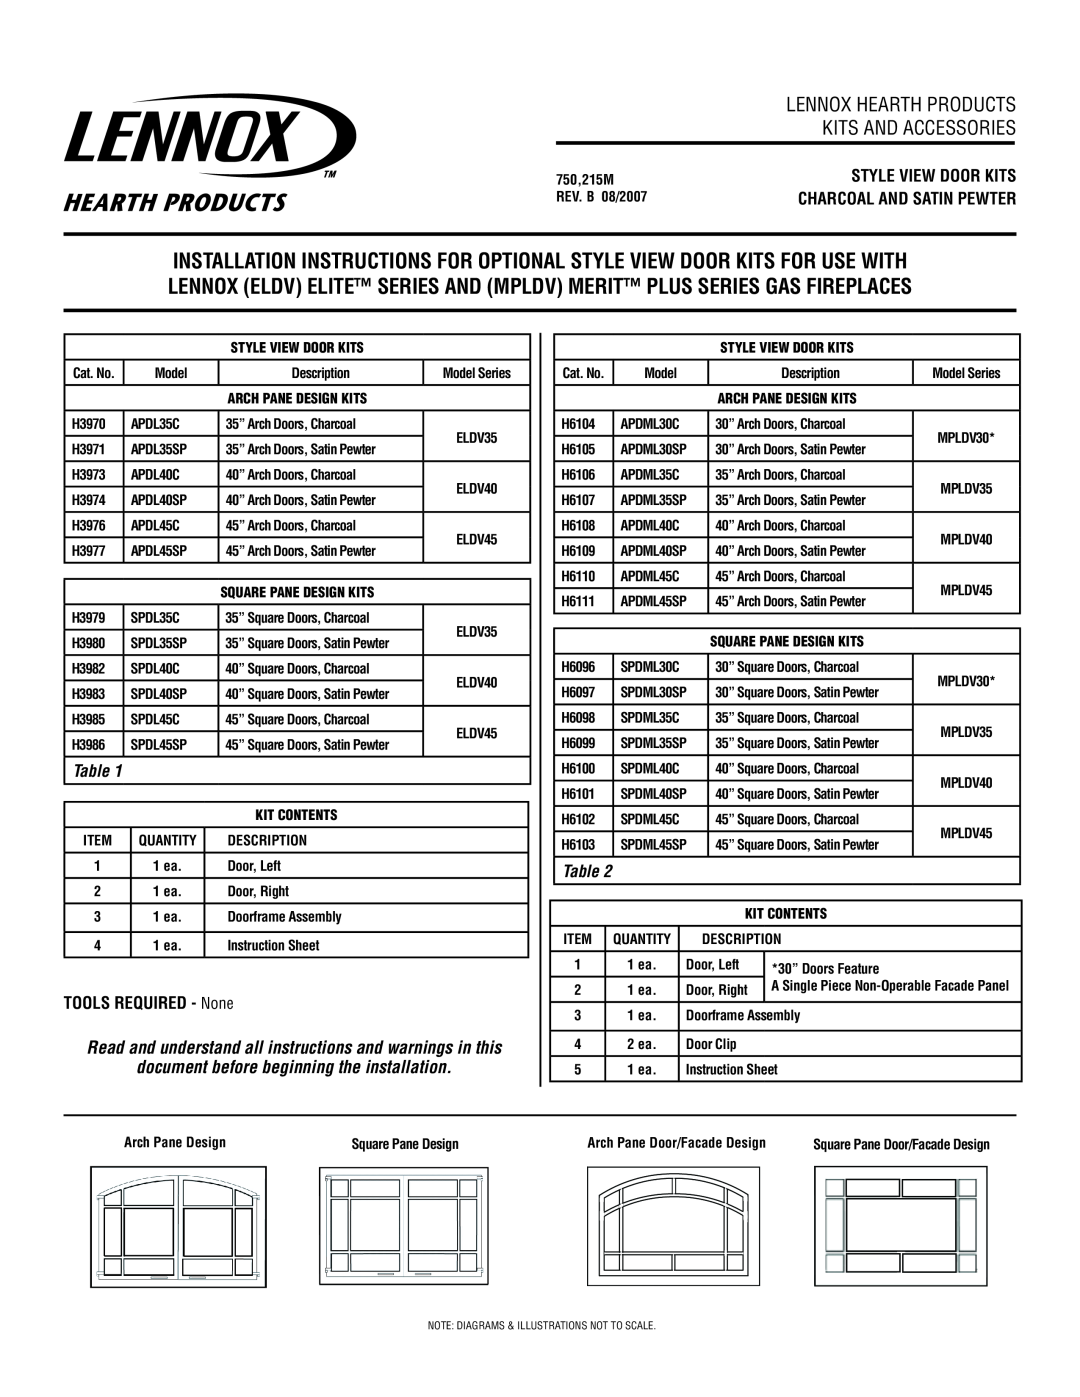 Lennox Hearth APDML35C installation instructions Style View Door Kits, TOOLS REQUIRED - None, Kits And Accessories, Model 